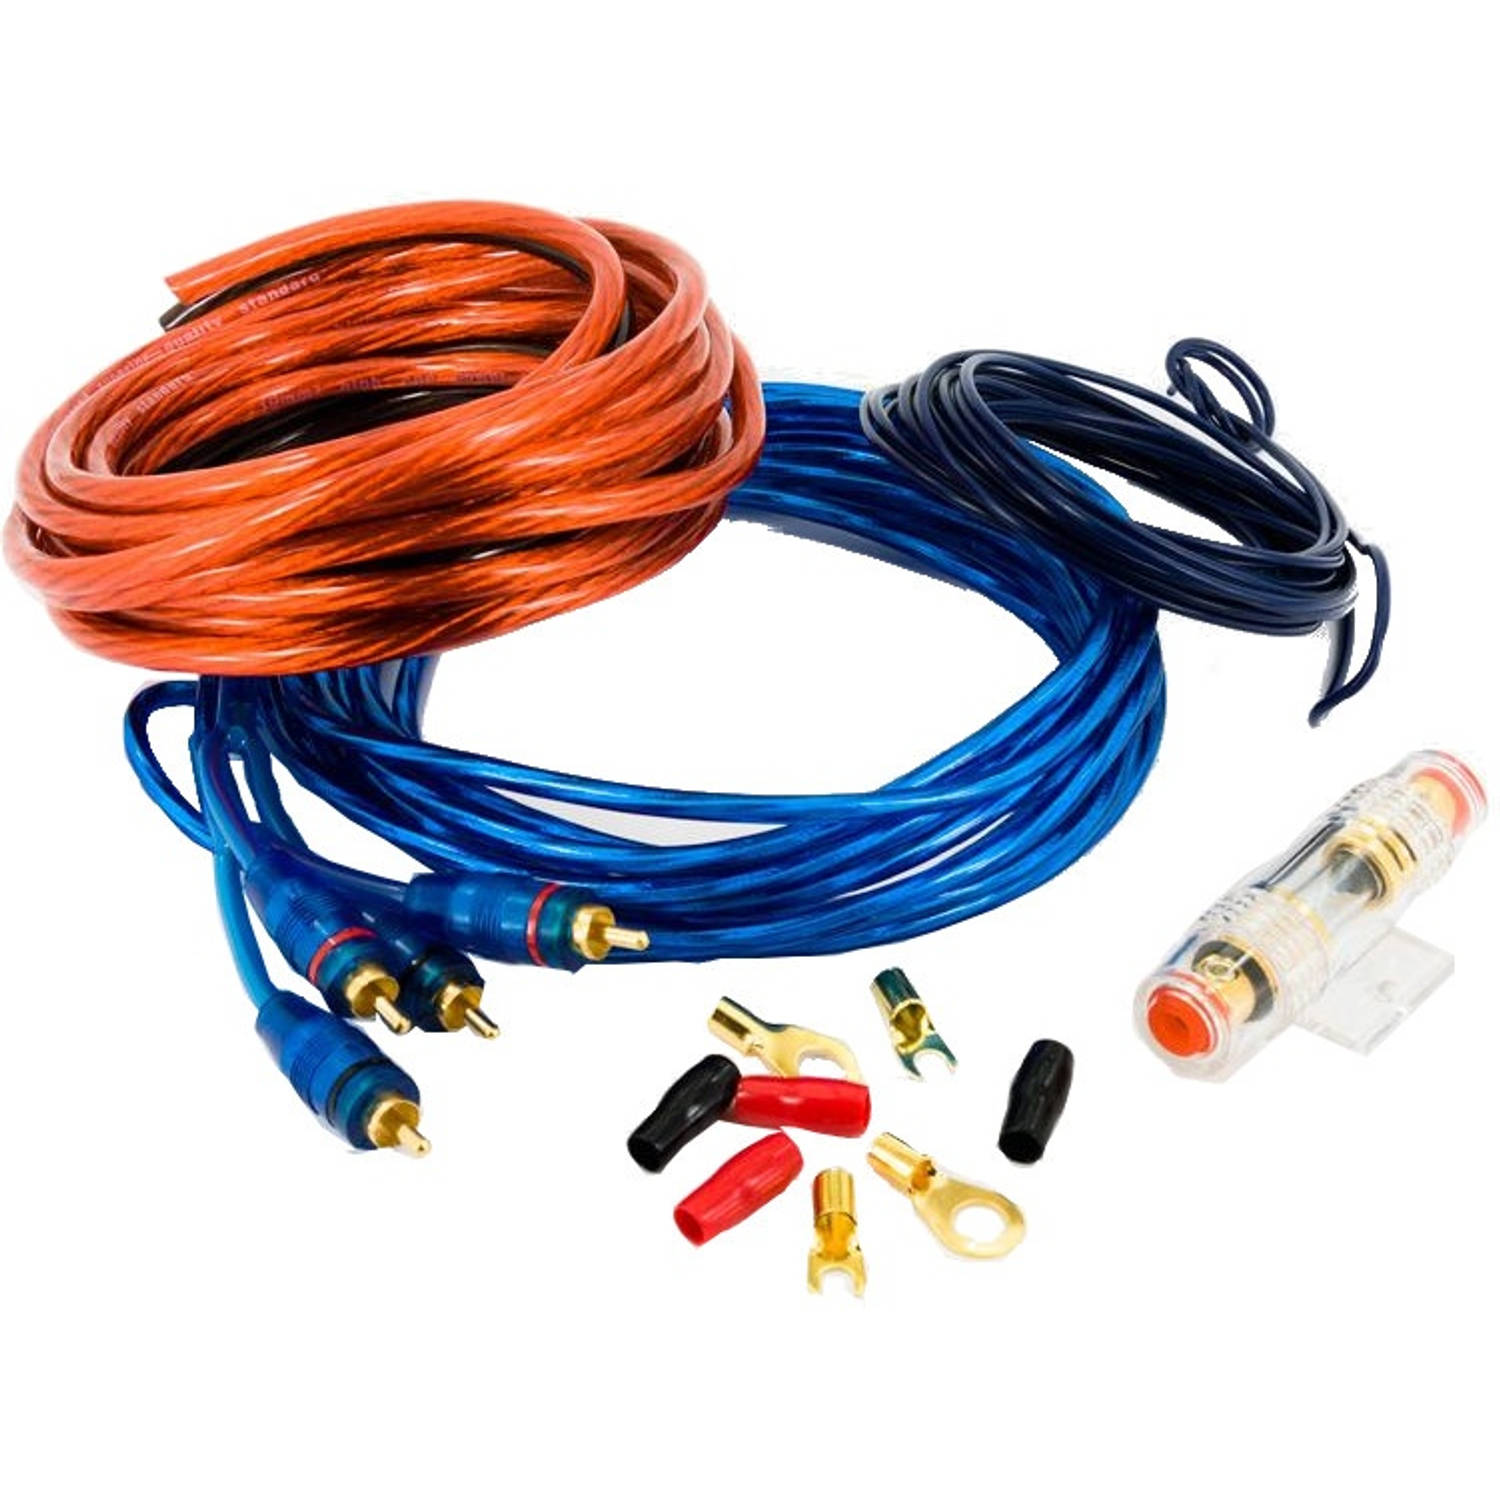 SSDN Audio SSDN Kabel Kit 750W 10mm2 - in blister